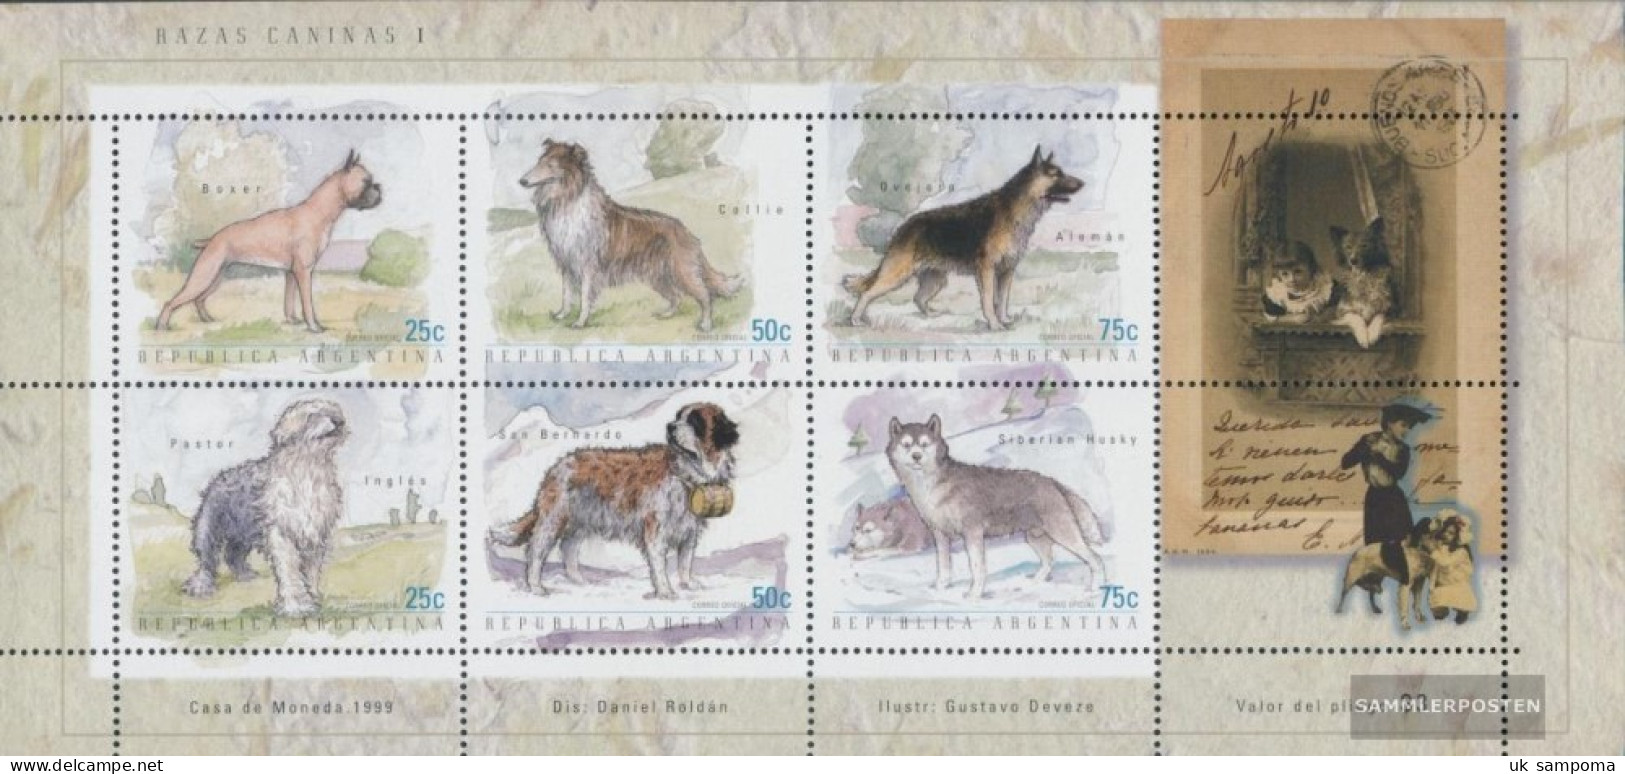 Argentina 2489-2494 Sheetlet (complete Issue) Unmounted Mint / Never Hinged 1999 Breeds - Unused Stamps